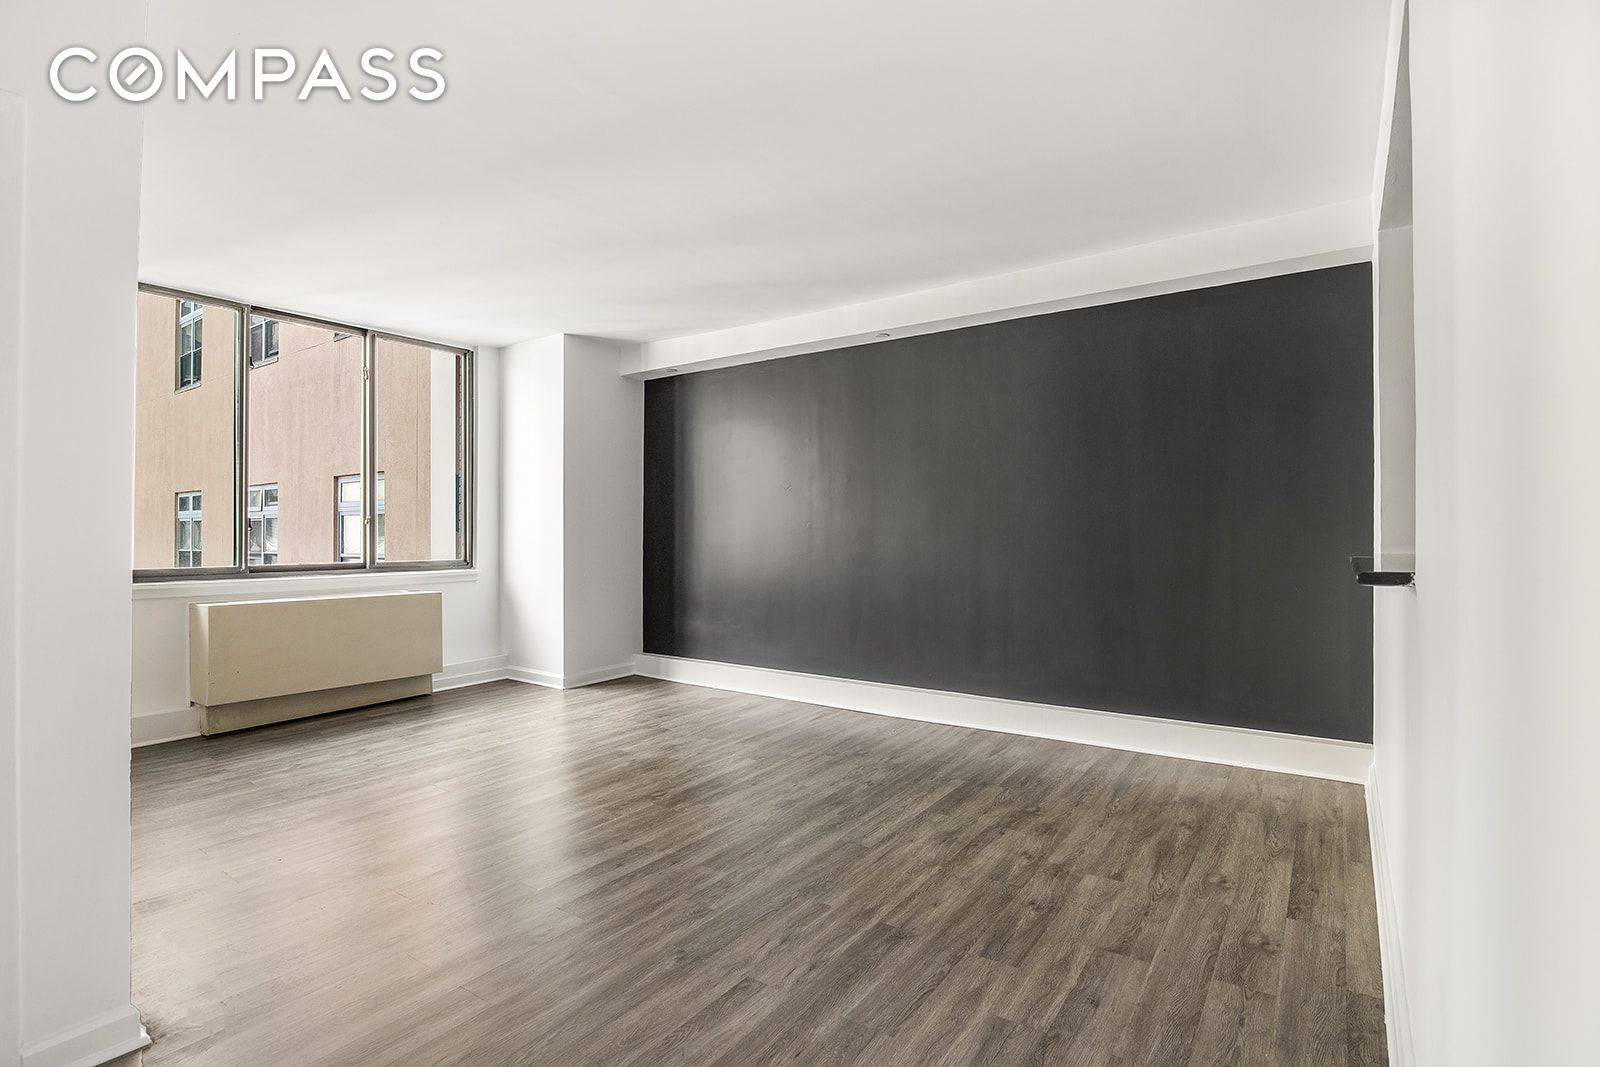 Located on the Bowery at the crossroads of Nolita, Lower East Side and East Village, Nolita Place is a luxury condominium, elevator building with a 24 hour doorman, large and ...